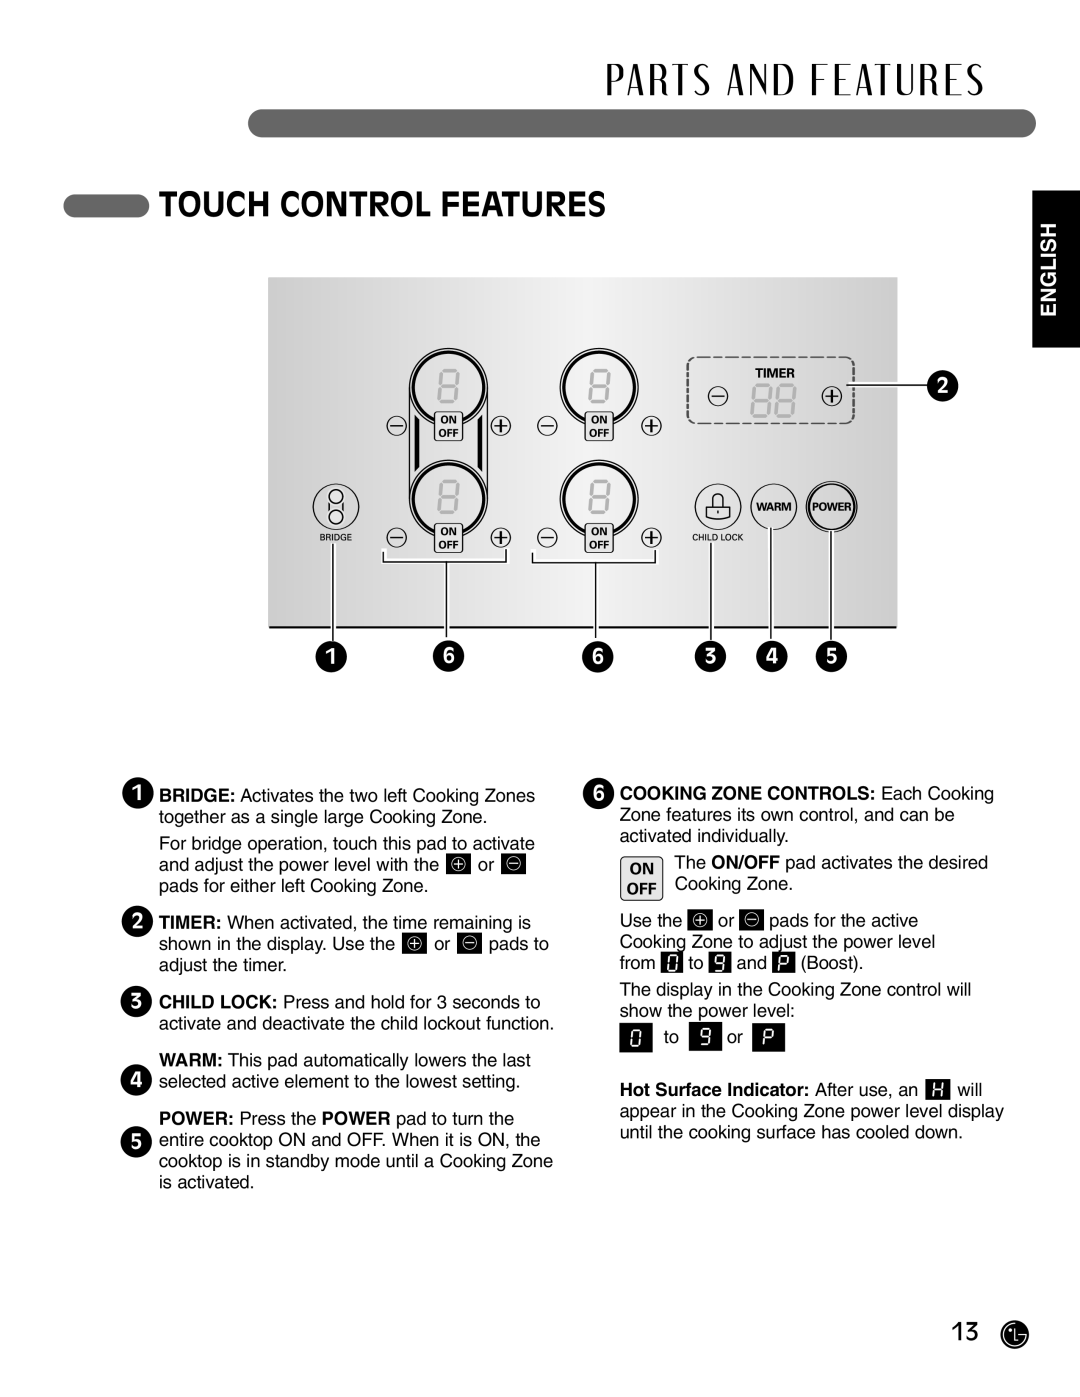 LG Electronics HN7413AG Touch Control Features, Pa Rt S A N D F E At U R E S, English, COOKING ZONE CONTROLS Each Cooking 